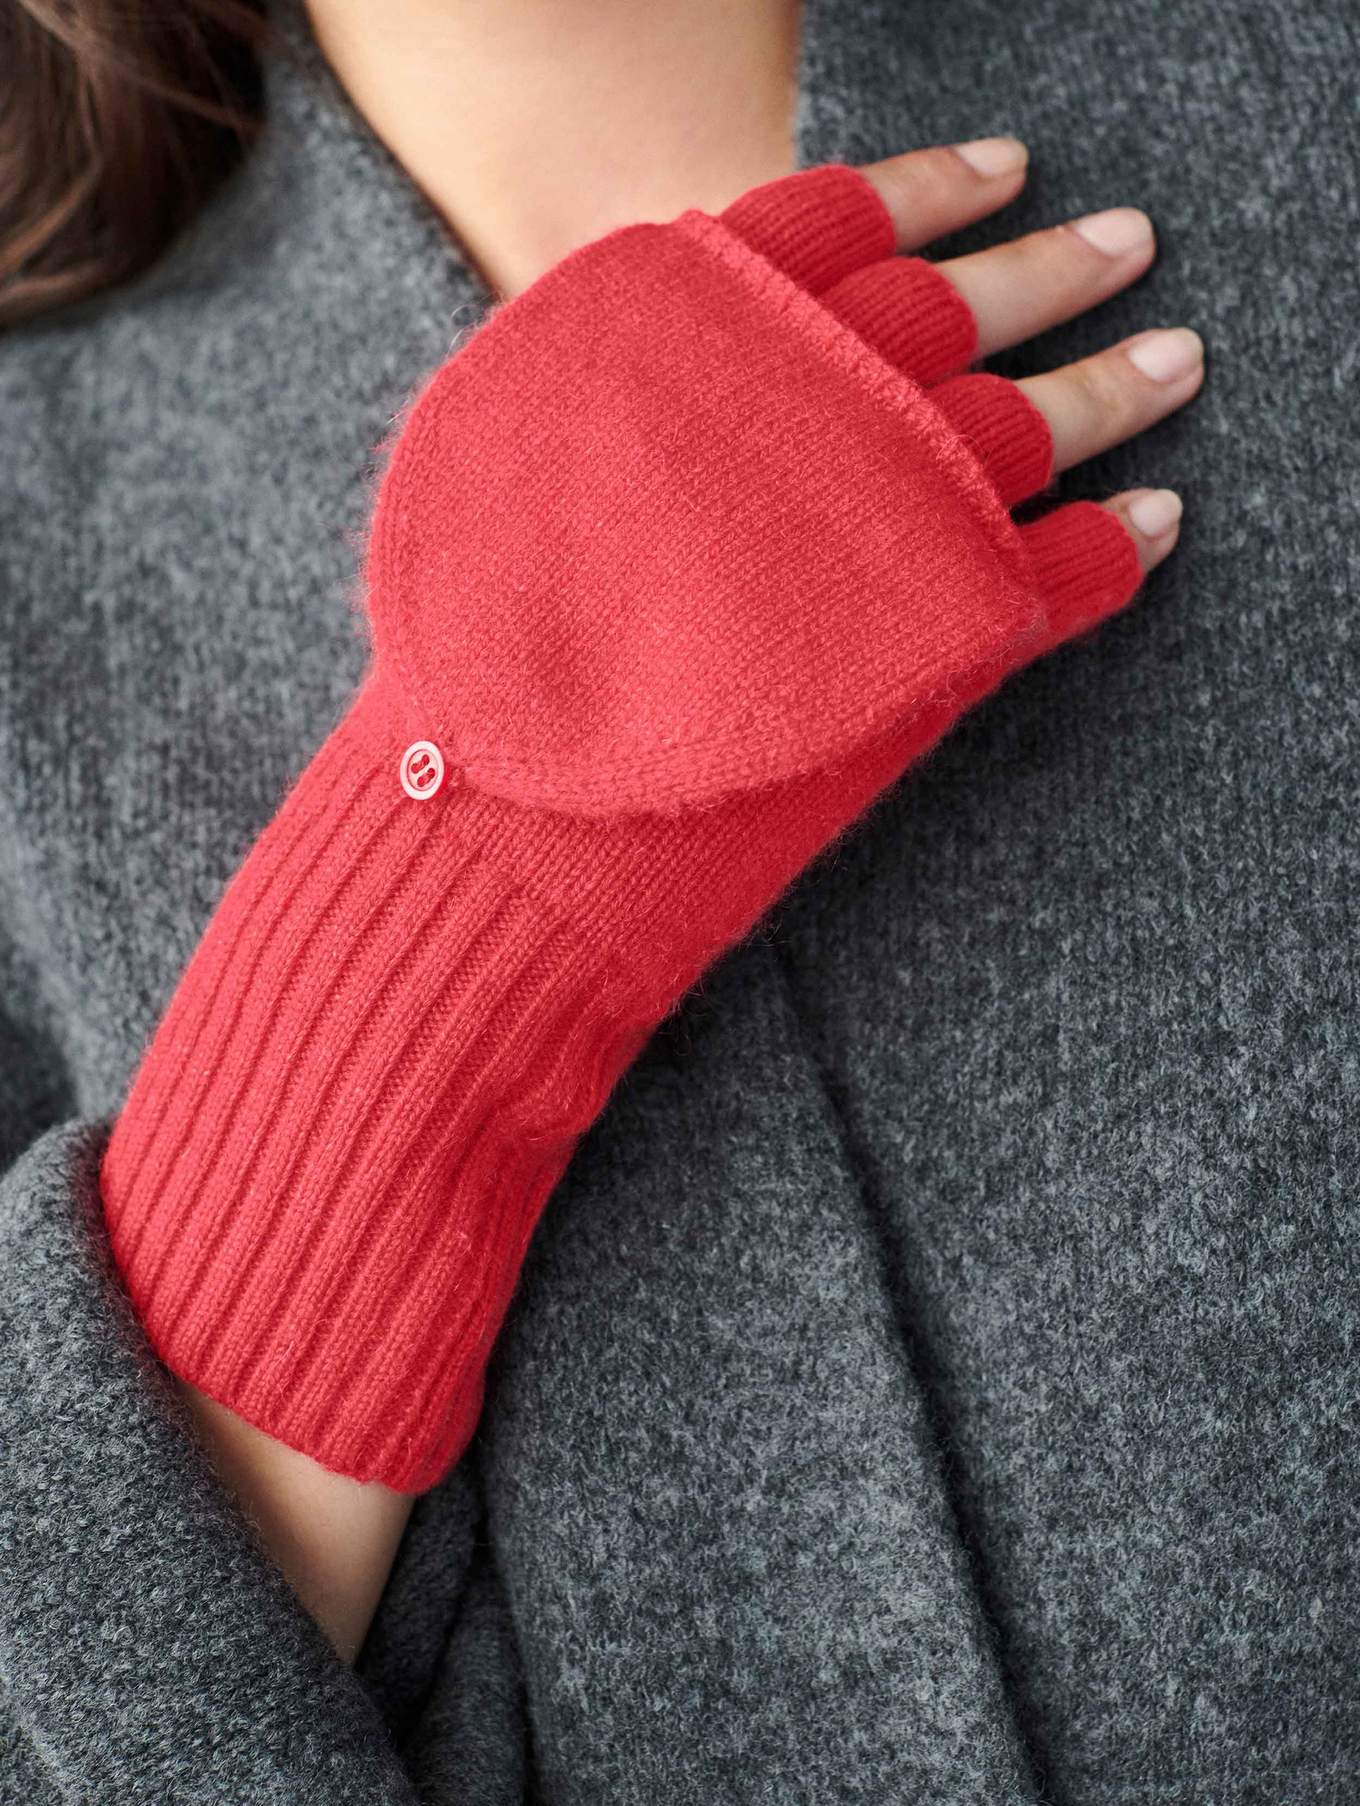 Cashmere Pop Top Glove- Candy Red